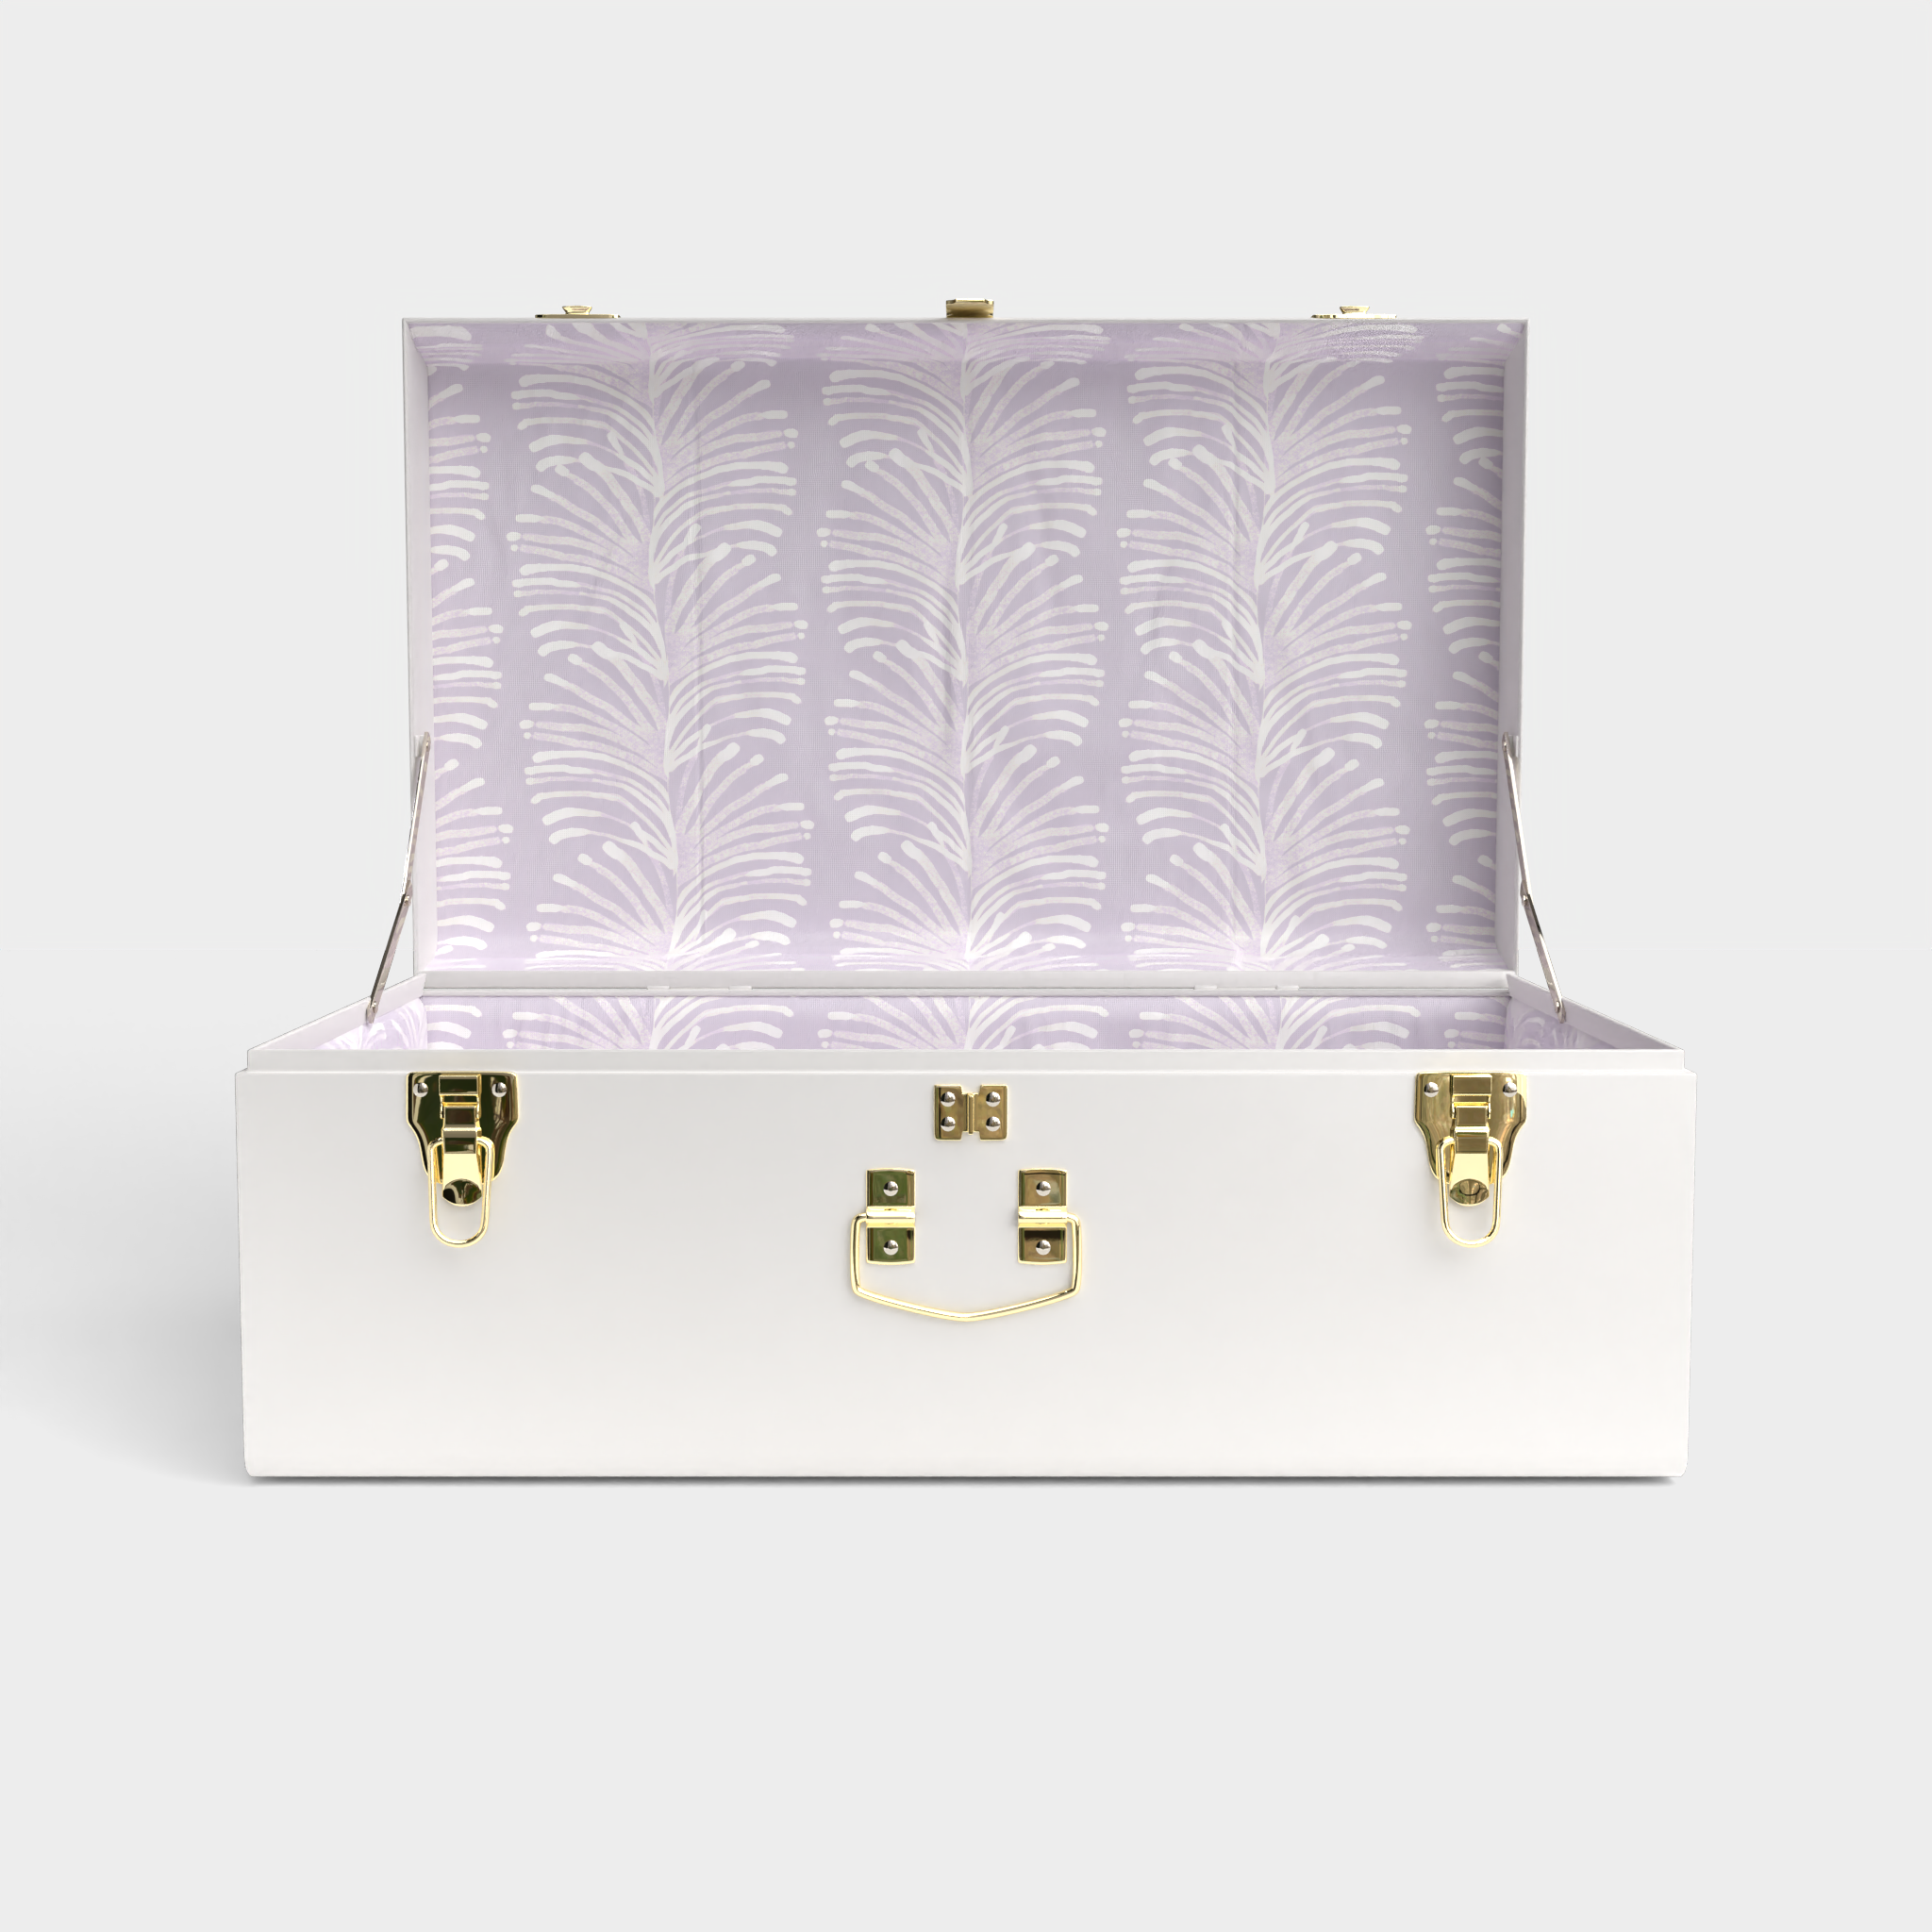 Product photo of a white trunk with lavender botanical striped fabric on the inside